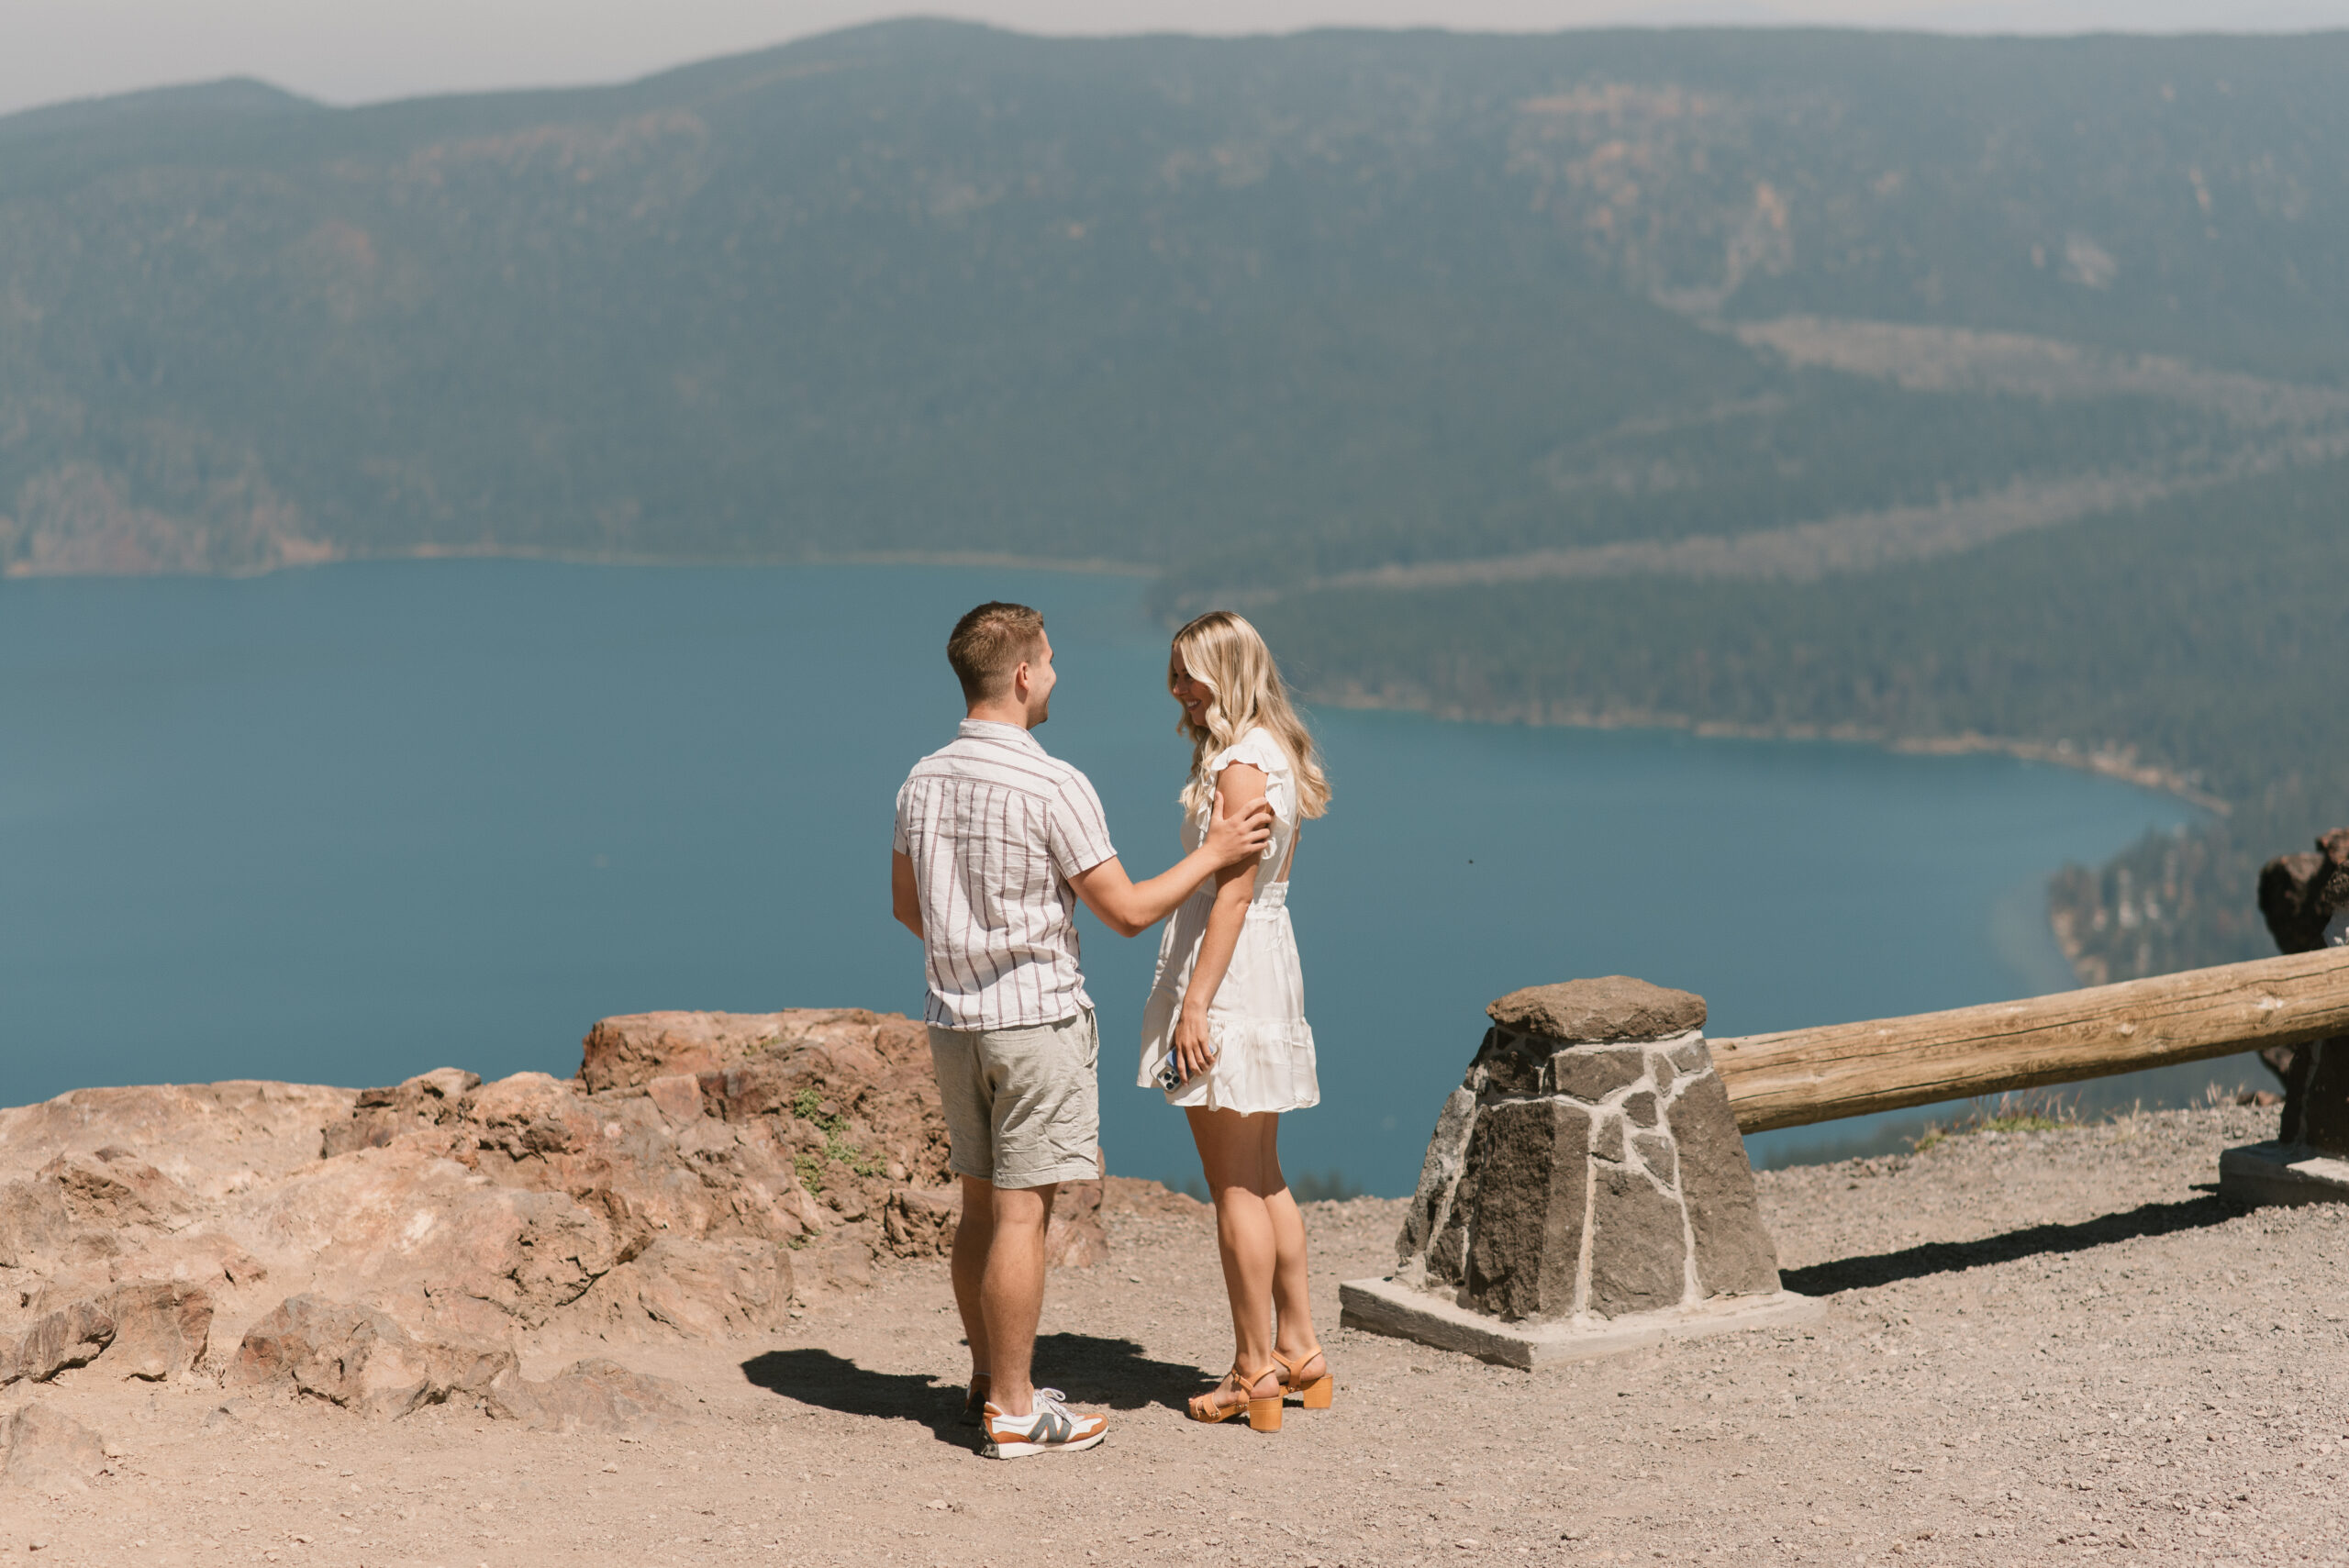 the couple at paulina peak taking in the views